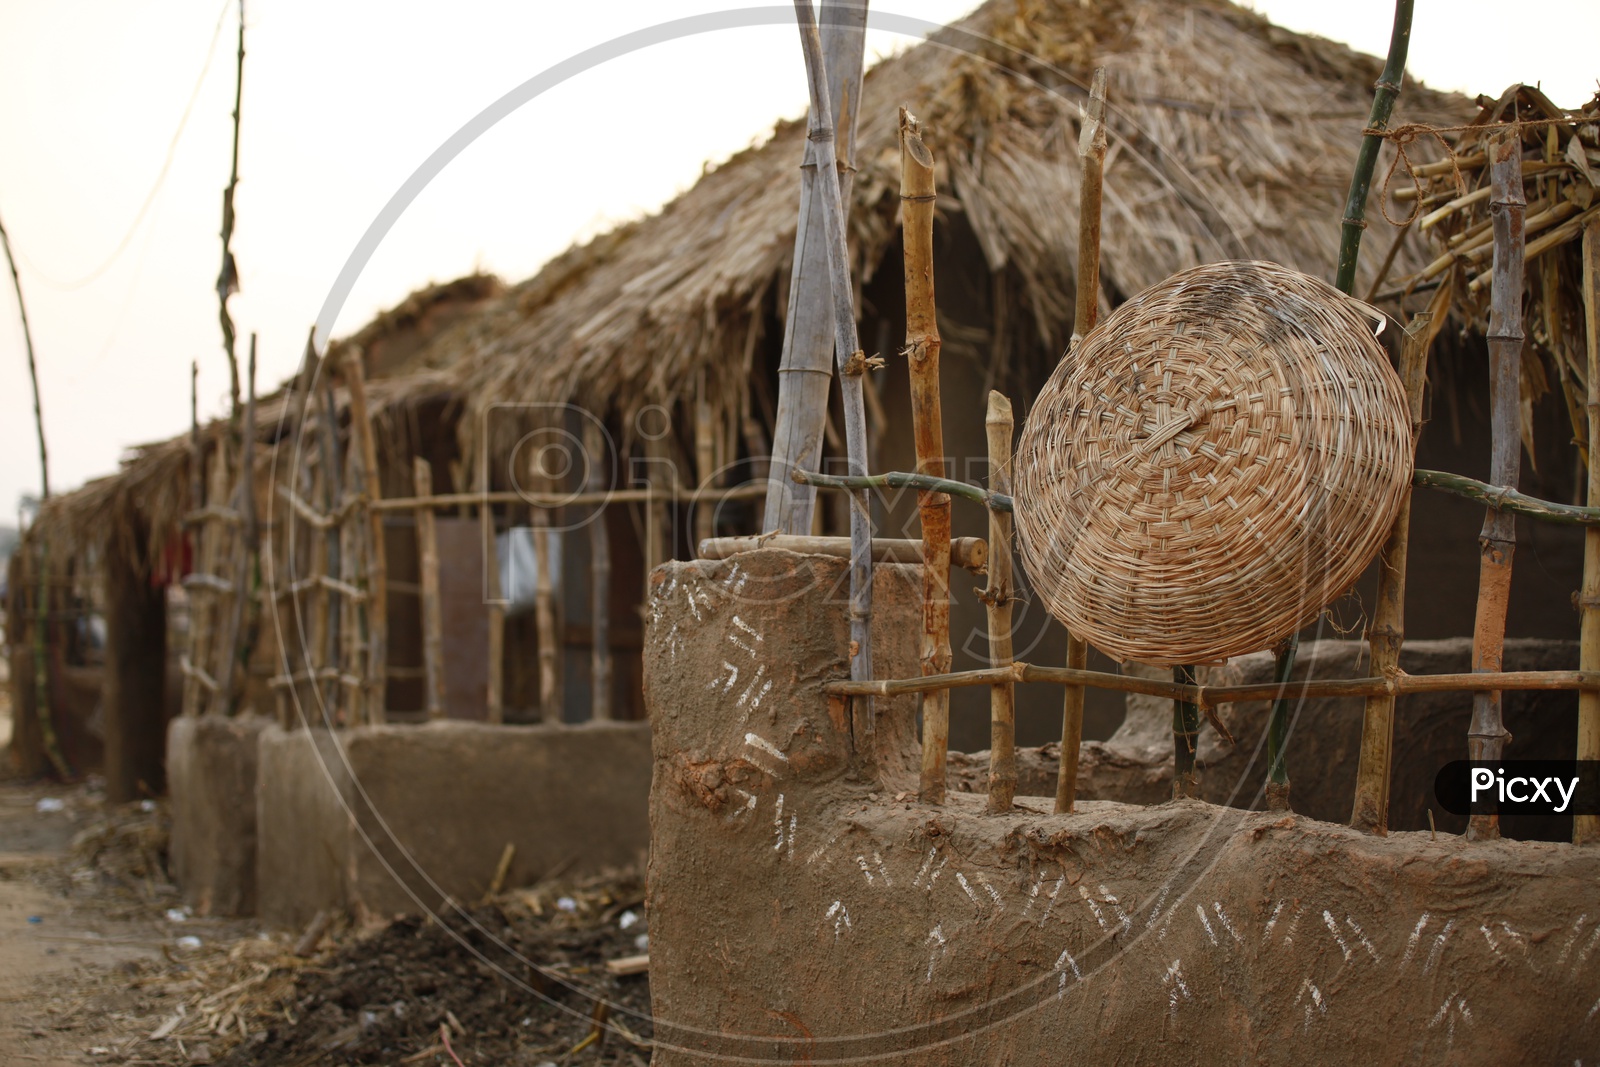 Bamboo woven basket on a boundary wall